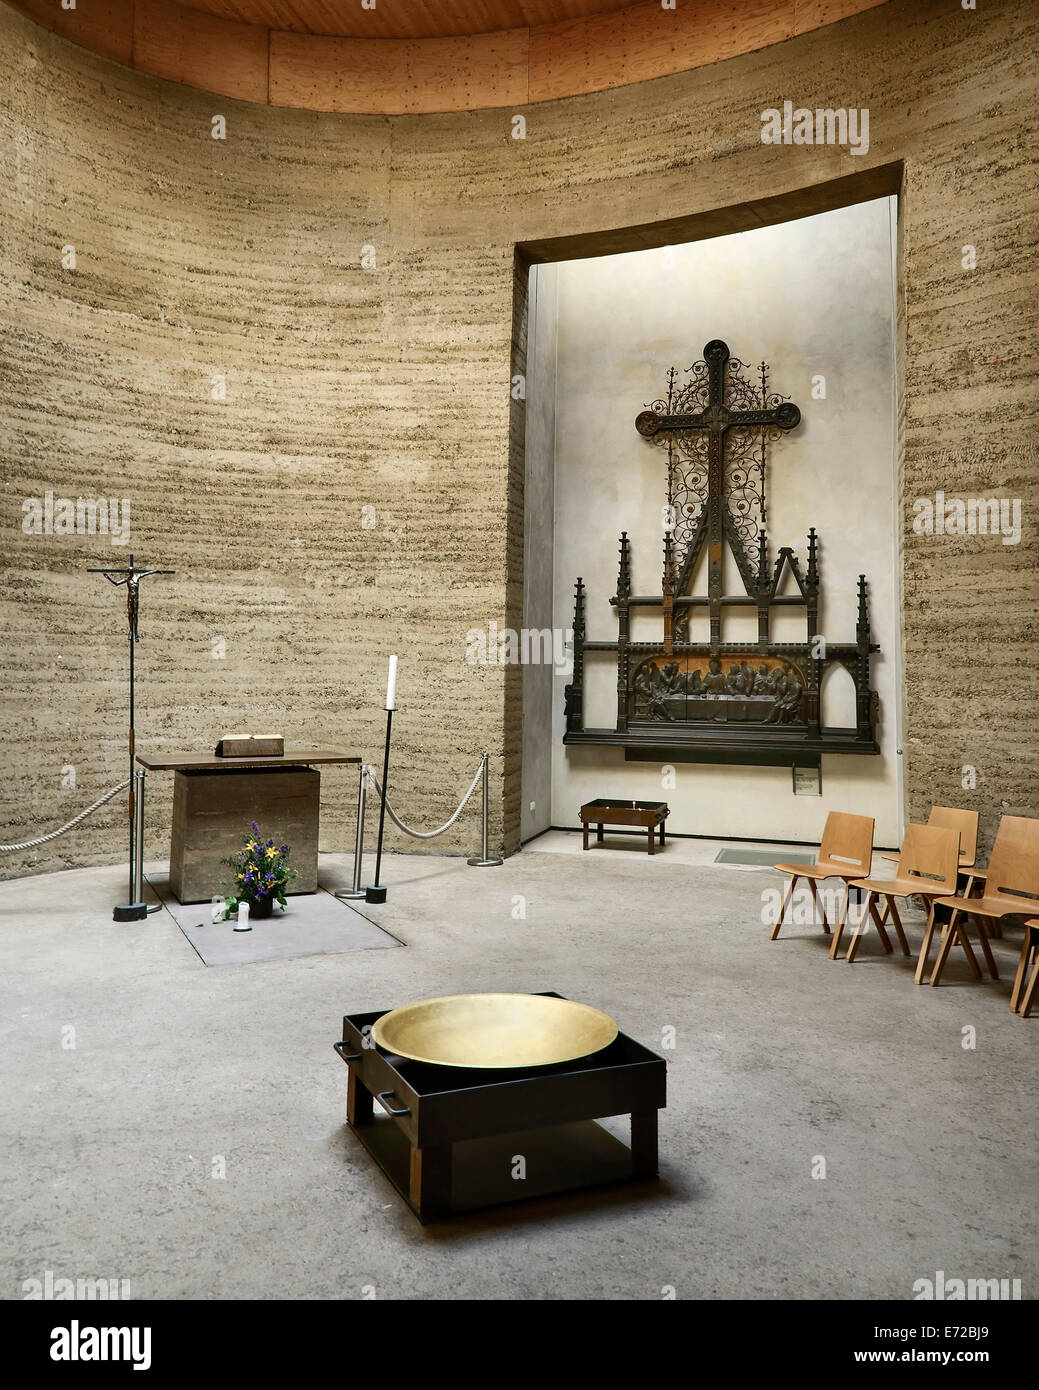 Germany, Berlin, Gedenkstatte Berliner Mauer also known as the Berlin Wall Memorial Exhibition at Bernauer Strasse  the interior of the restored Chapel of Reconciliation which was once within the death strip and thus was demolished in 1985. Stock Photo